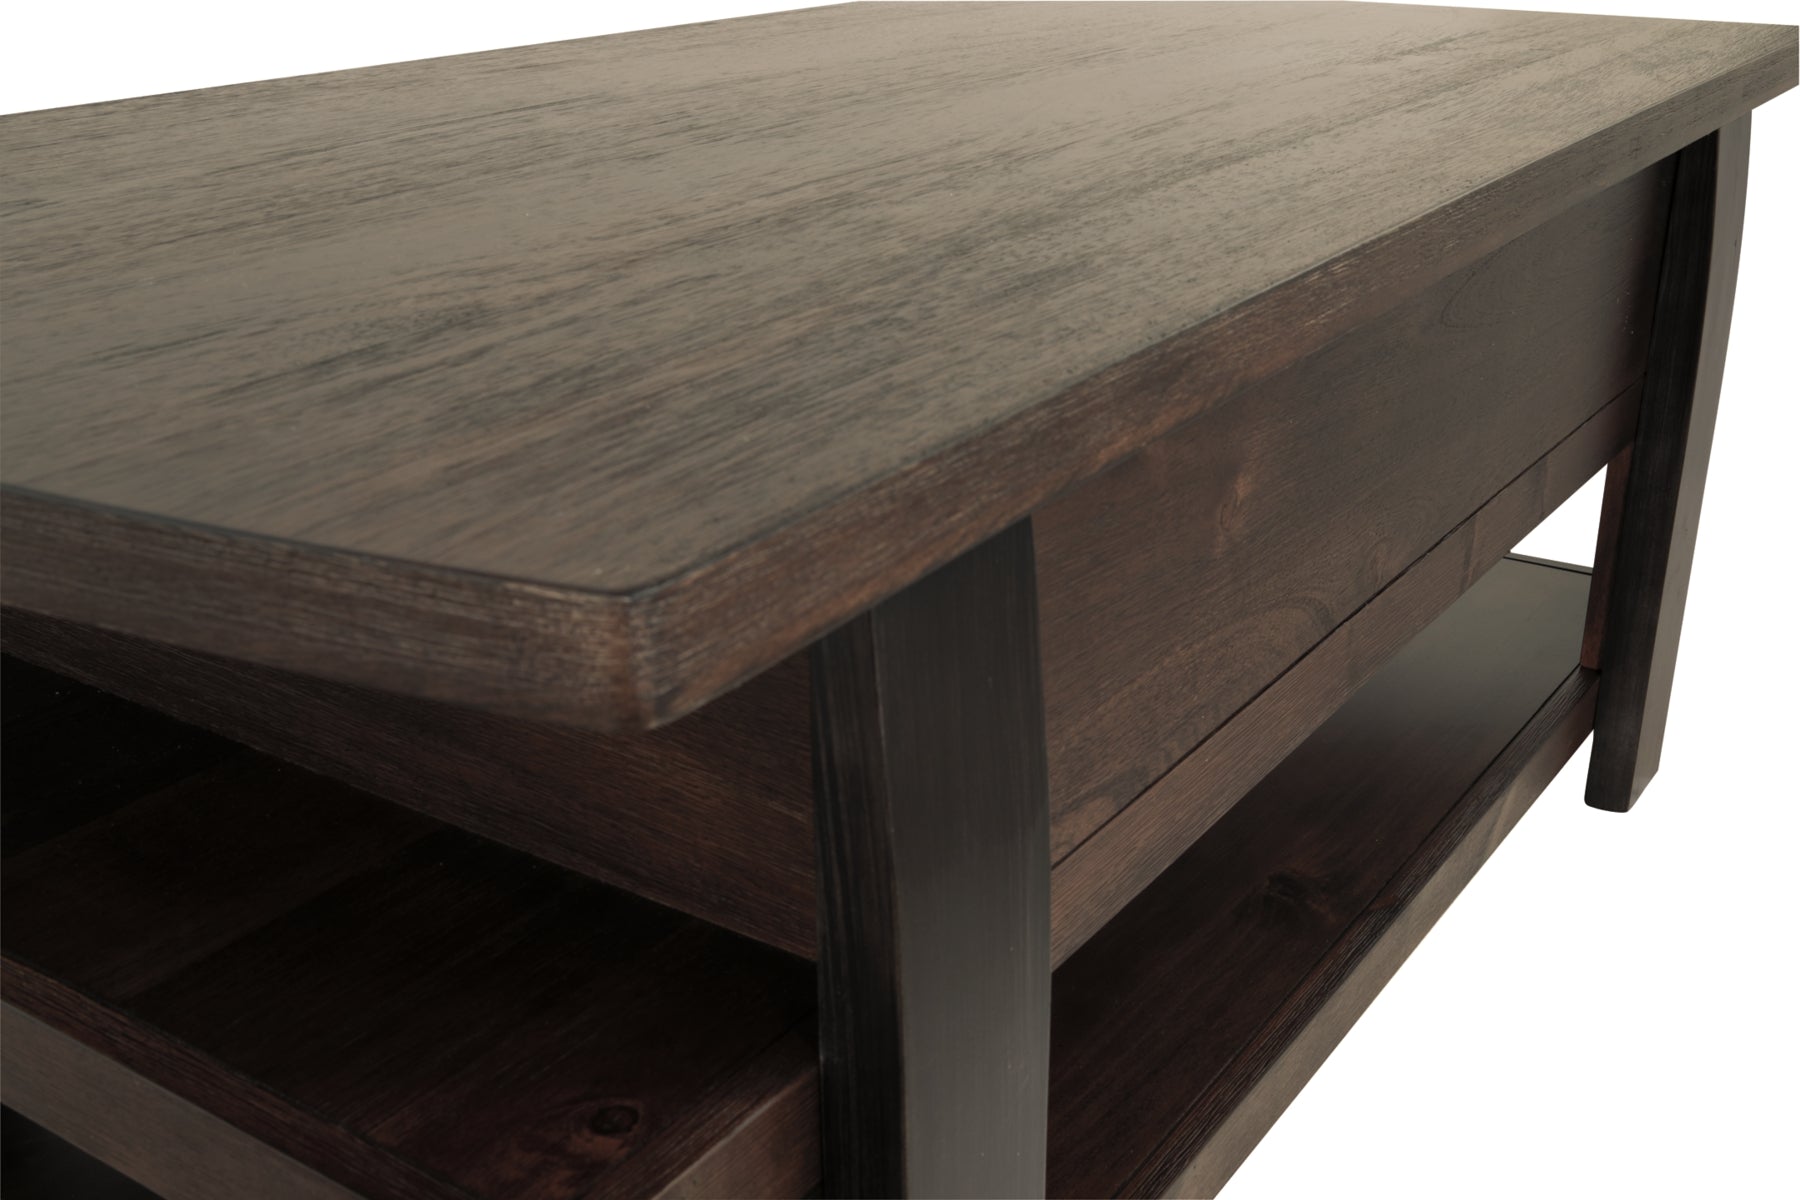 Vailbry Coffee Table with Lift Top